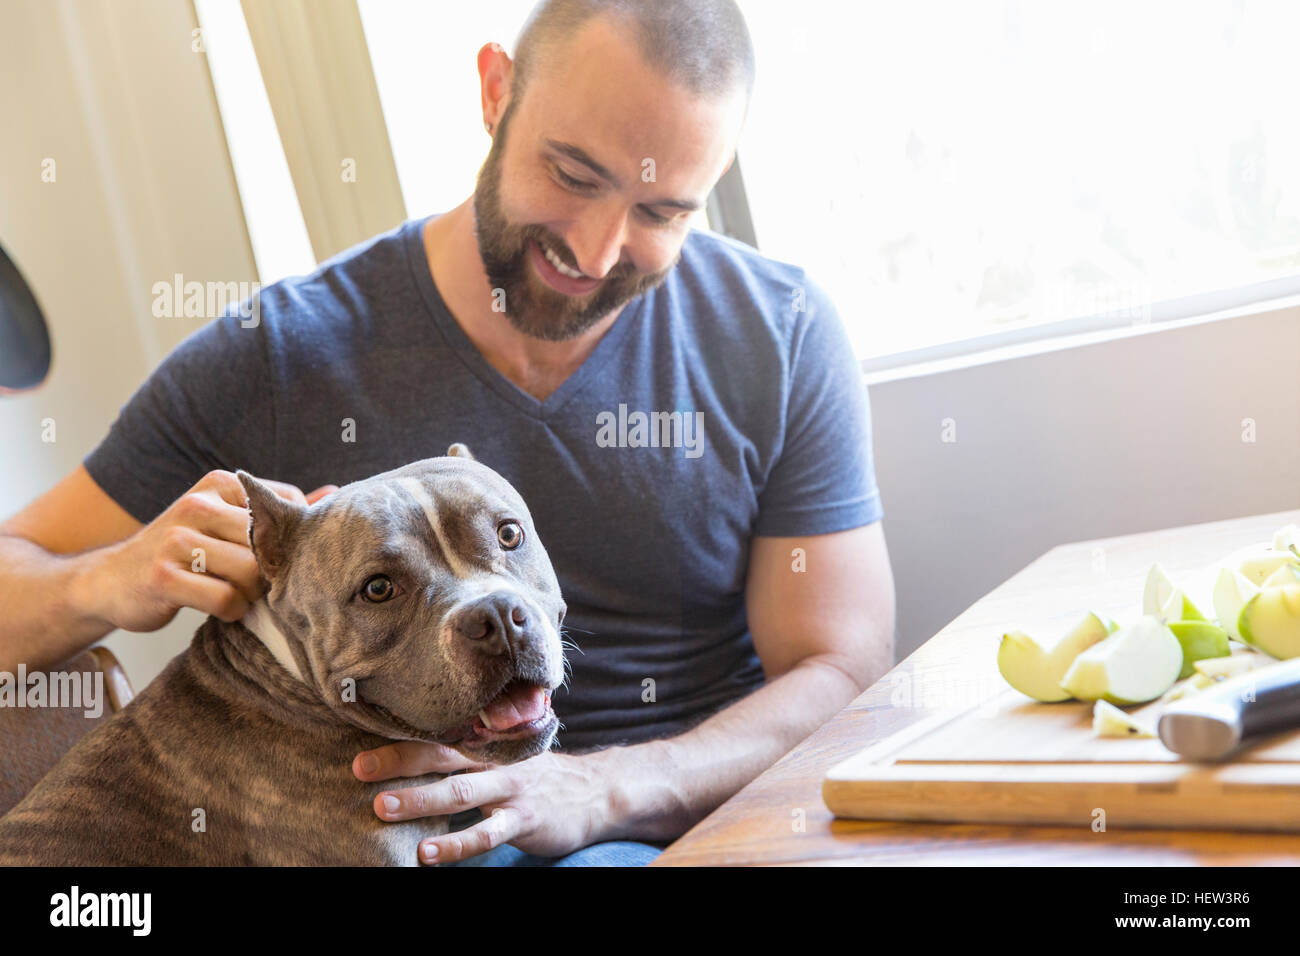 Portrait of mid adult man petting dog in kitchen Banque D'Images